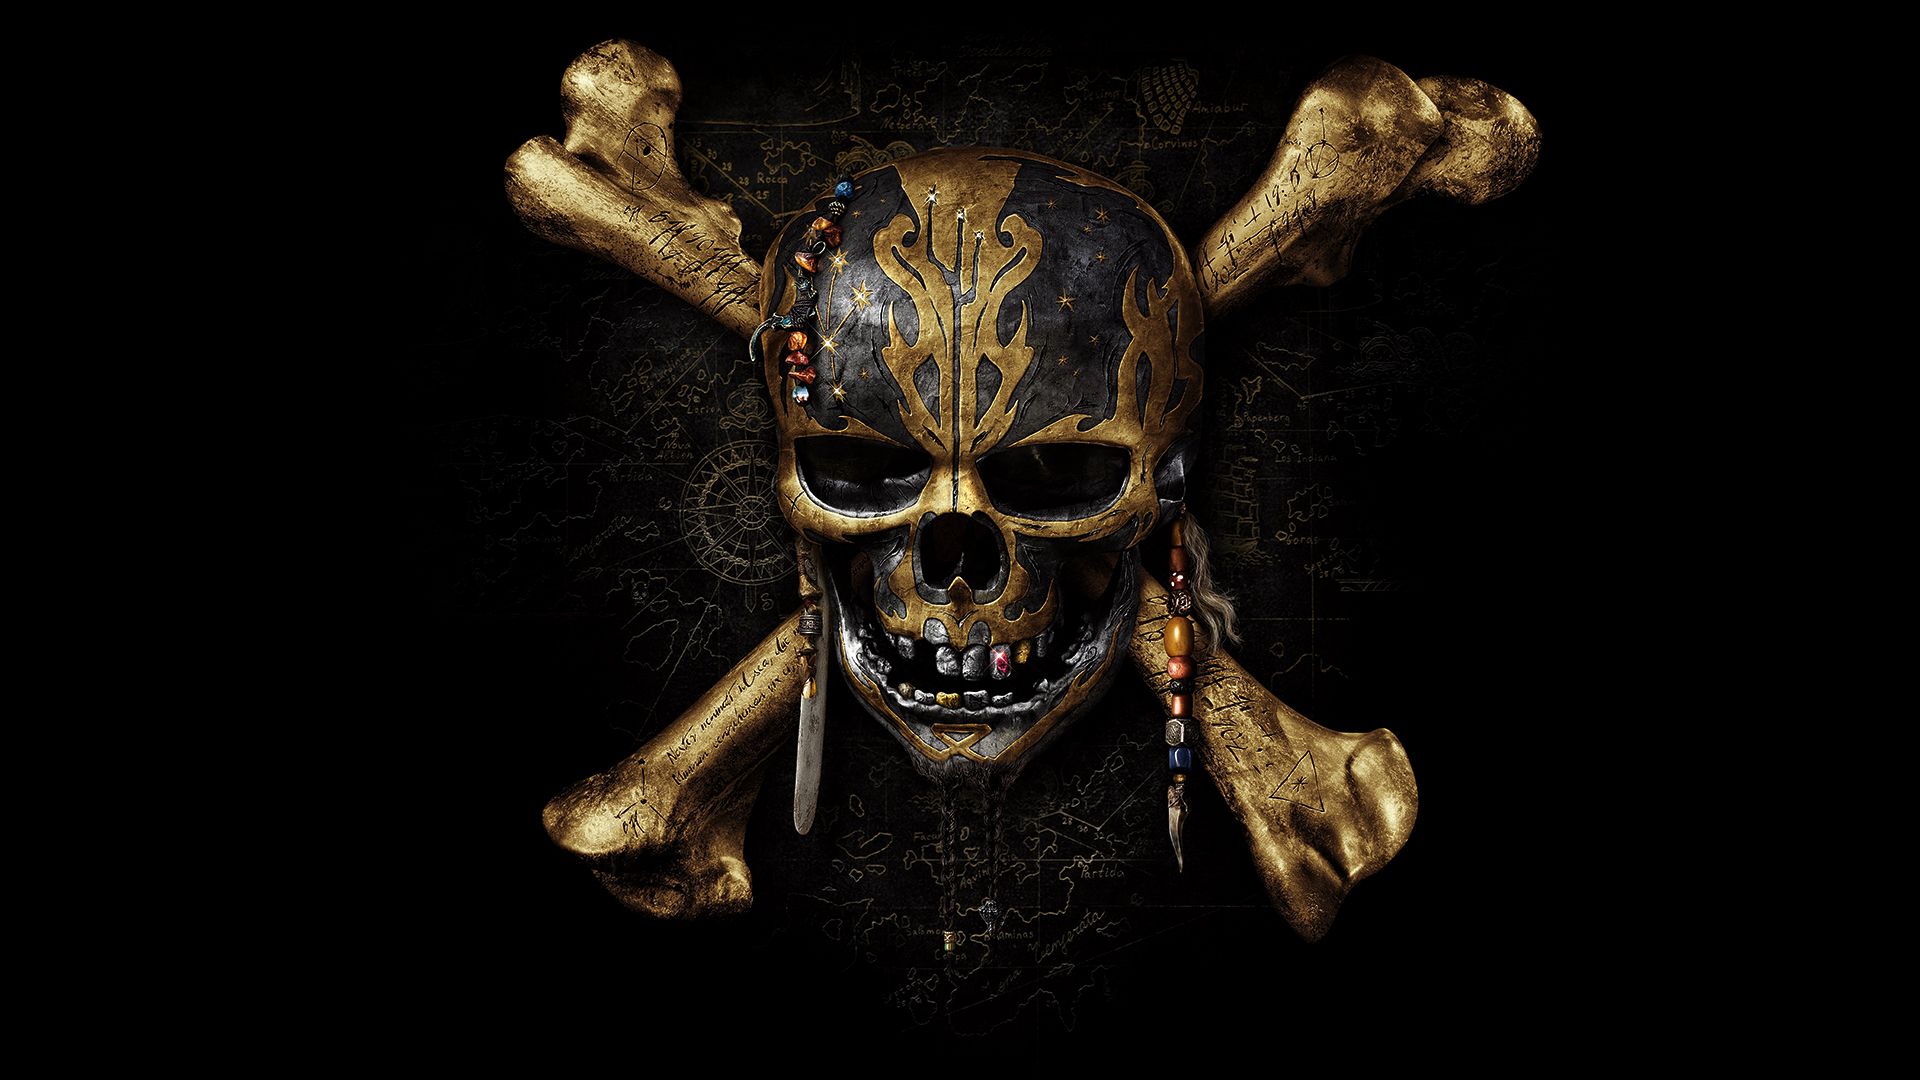 Pirates of the Caribbean: Dead Men Tell No Tales background